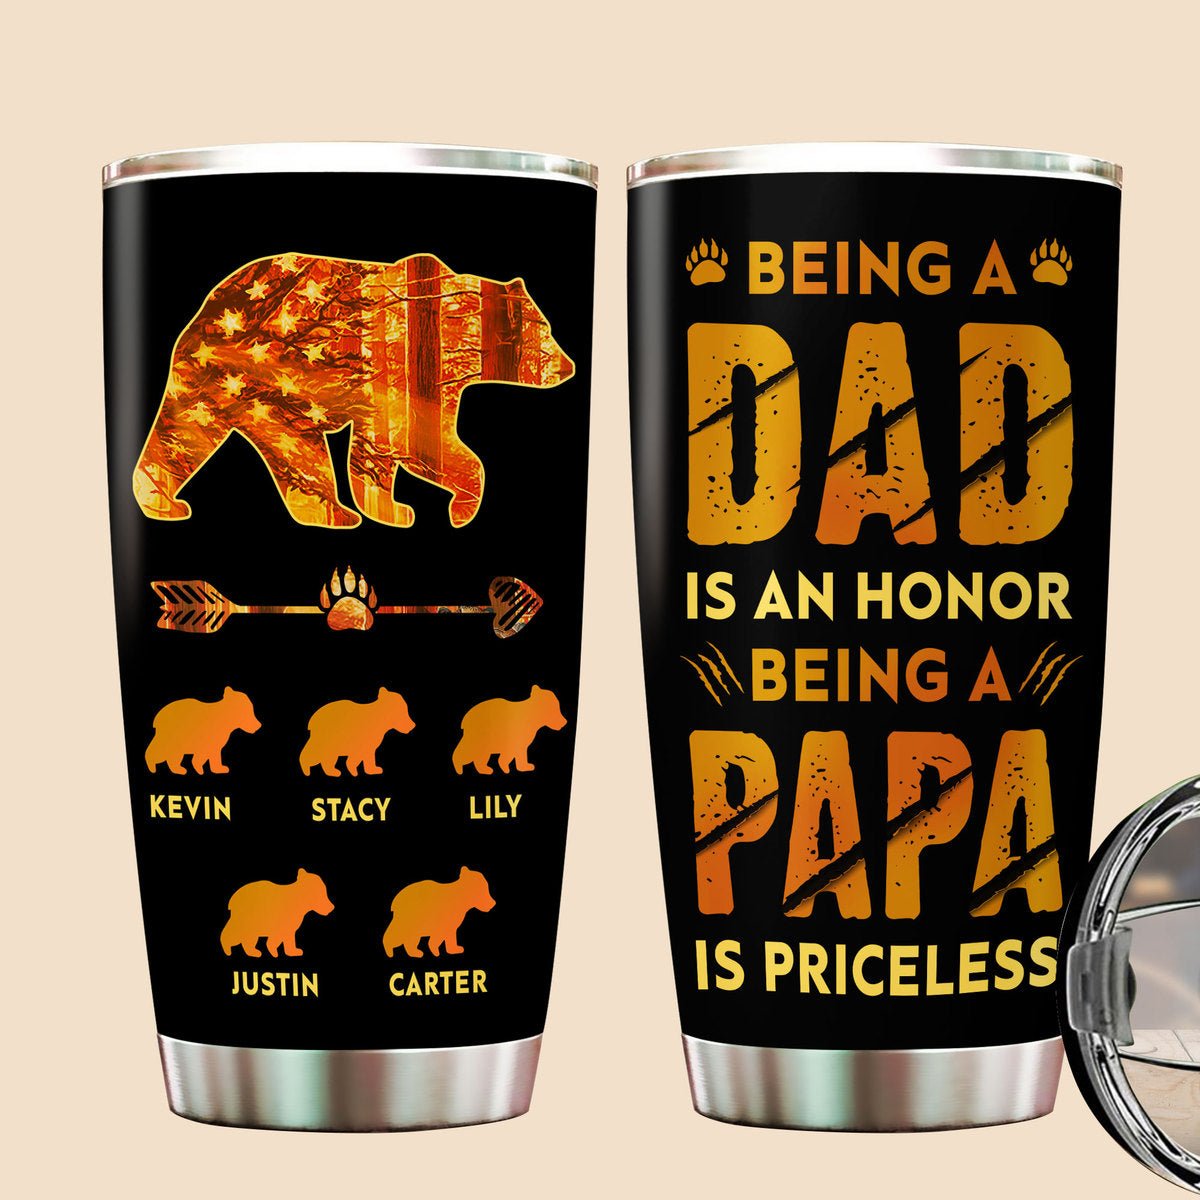 Papa Bear Tumbler For Dad - Stainless Steel American Flag Tumbler Cup 20oz  for Father - Birthday Gifts for Dad From Daughter Son - Fathers Day Gift